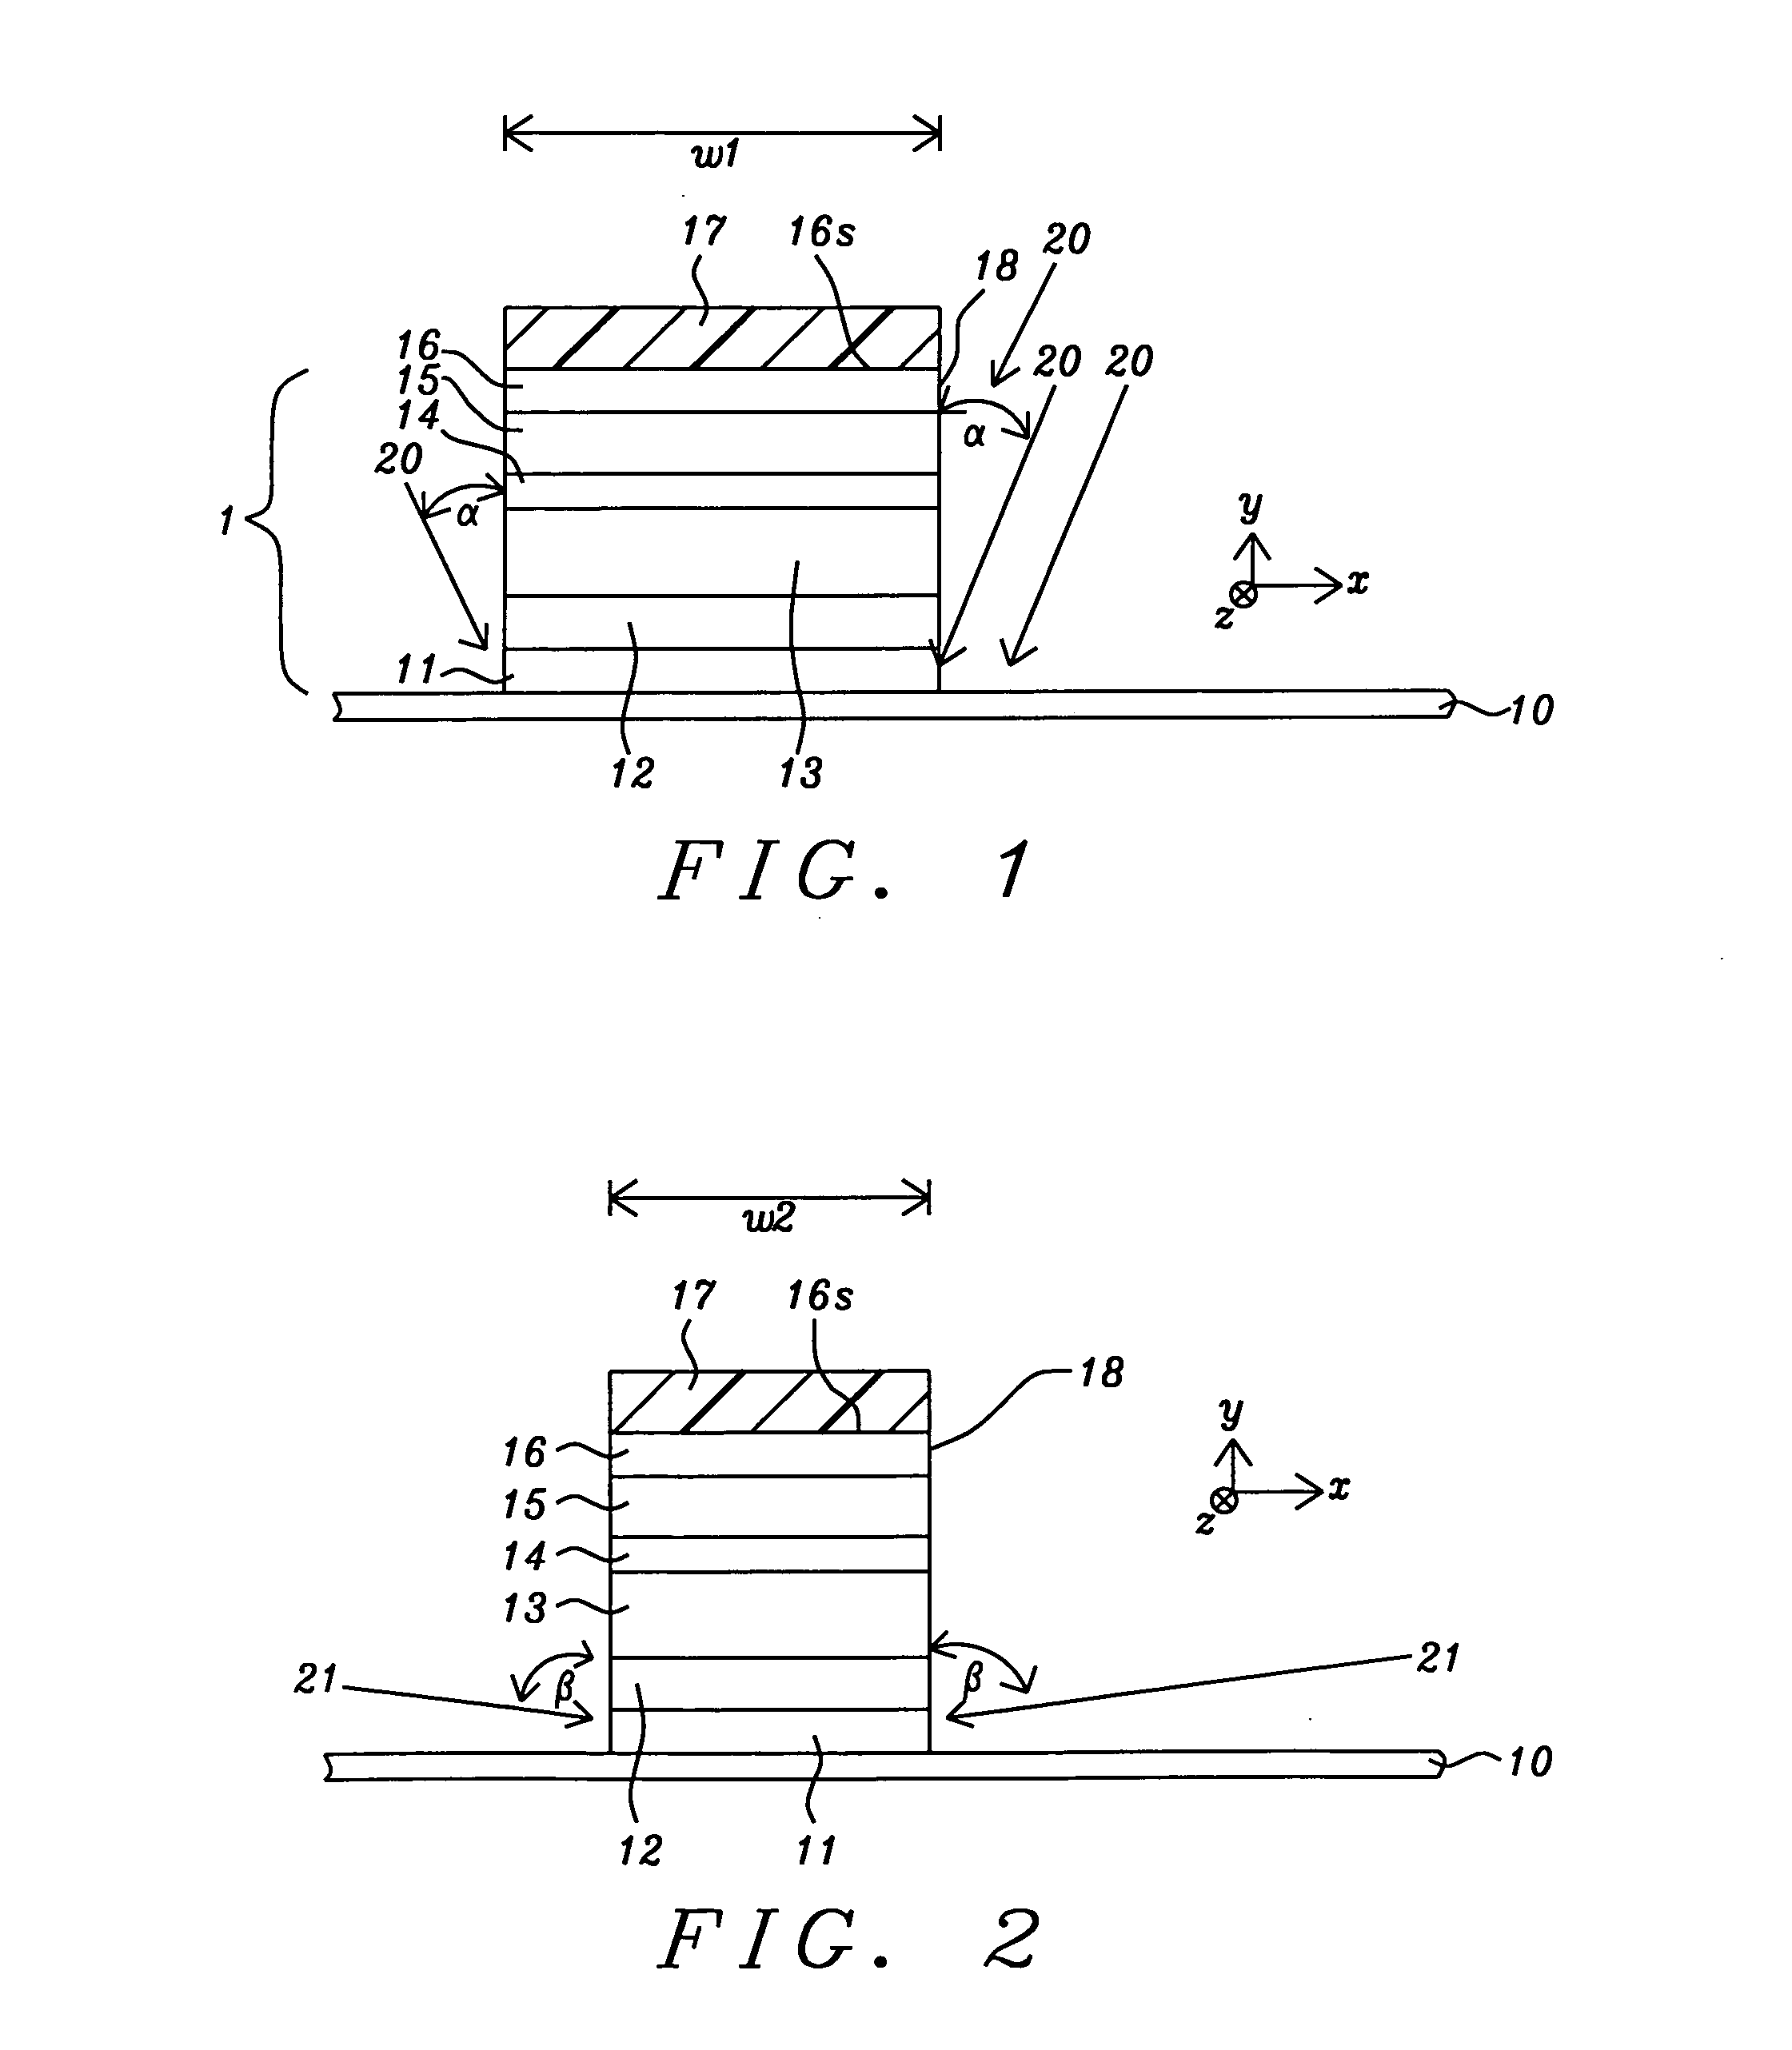 Method to fabricate small dimension devices for magnetic recording applications